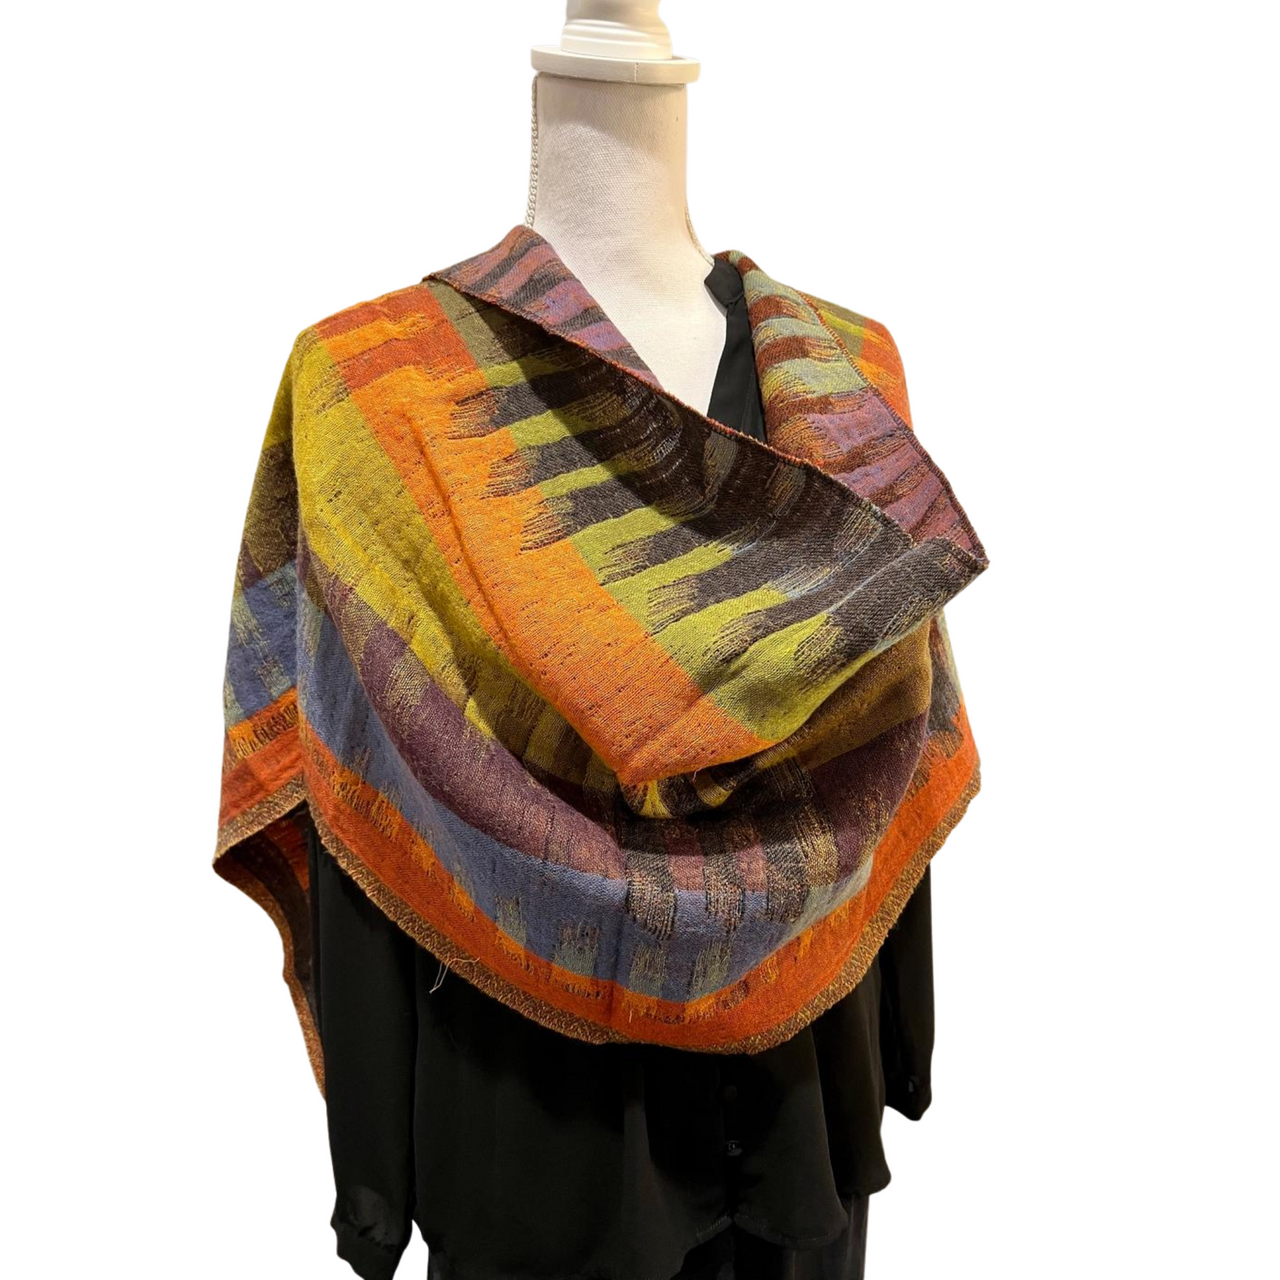 In Style: Reversible Scarf/Shawl